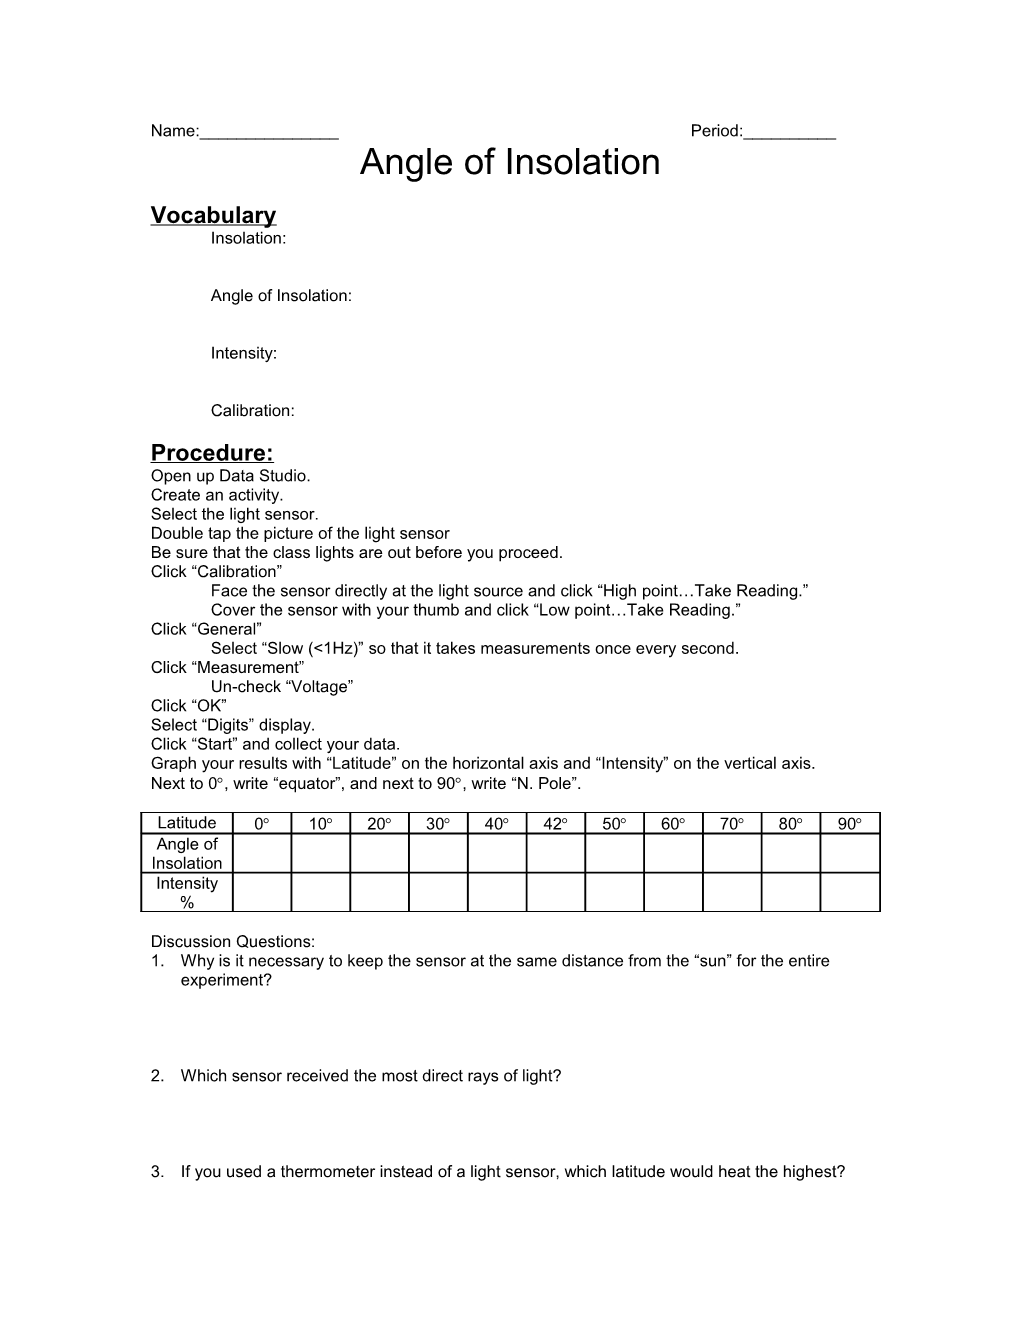 Angle of Insolation